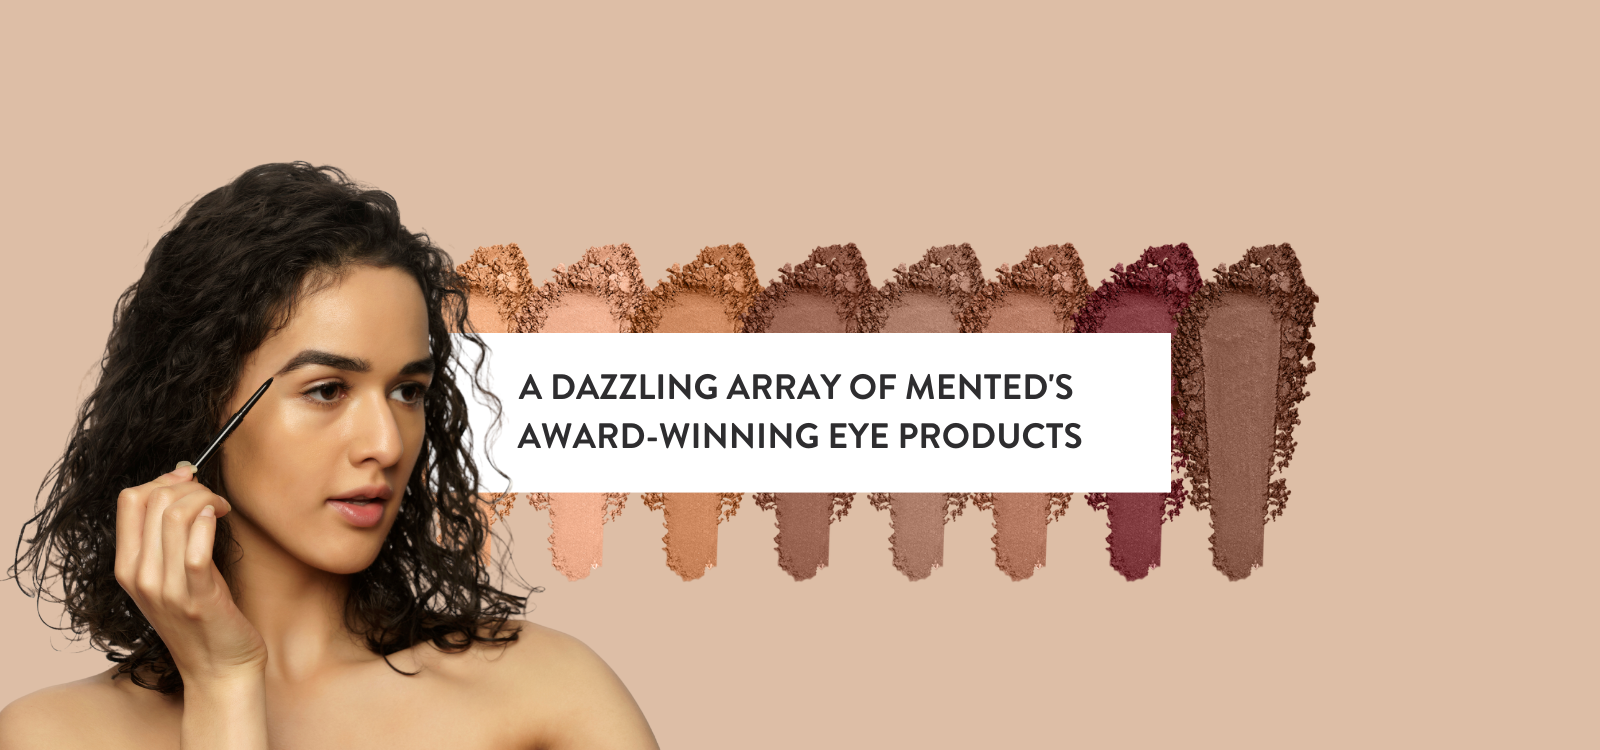 A Dazzling Array of Mented's Award-Winning Eye Products